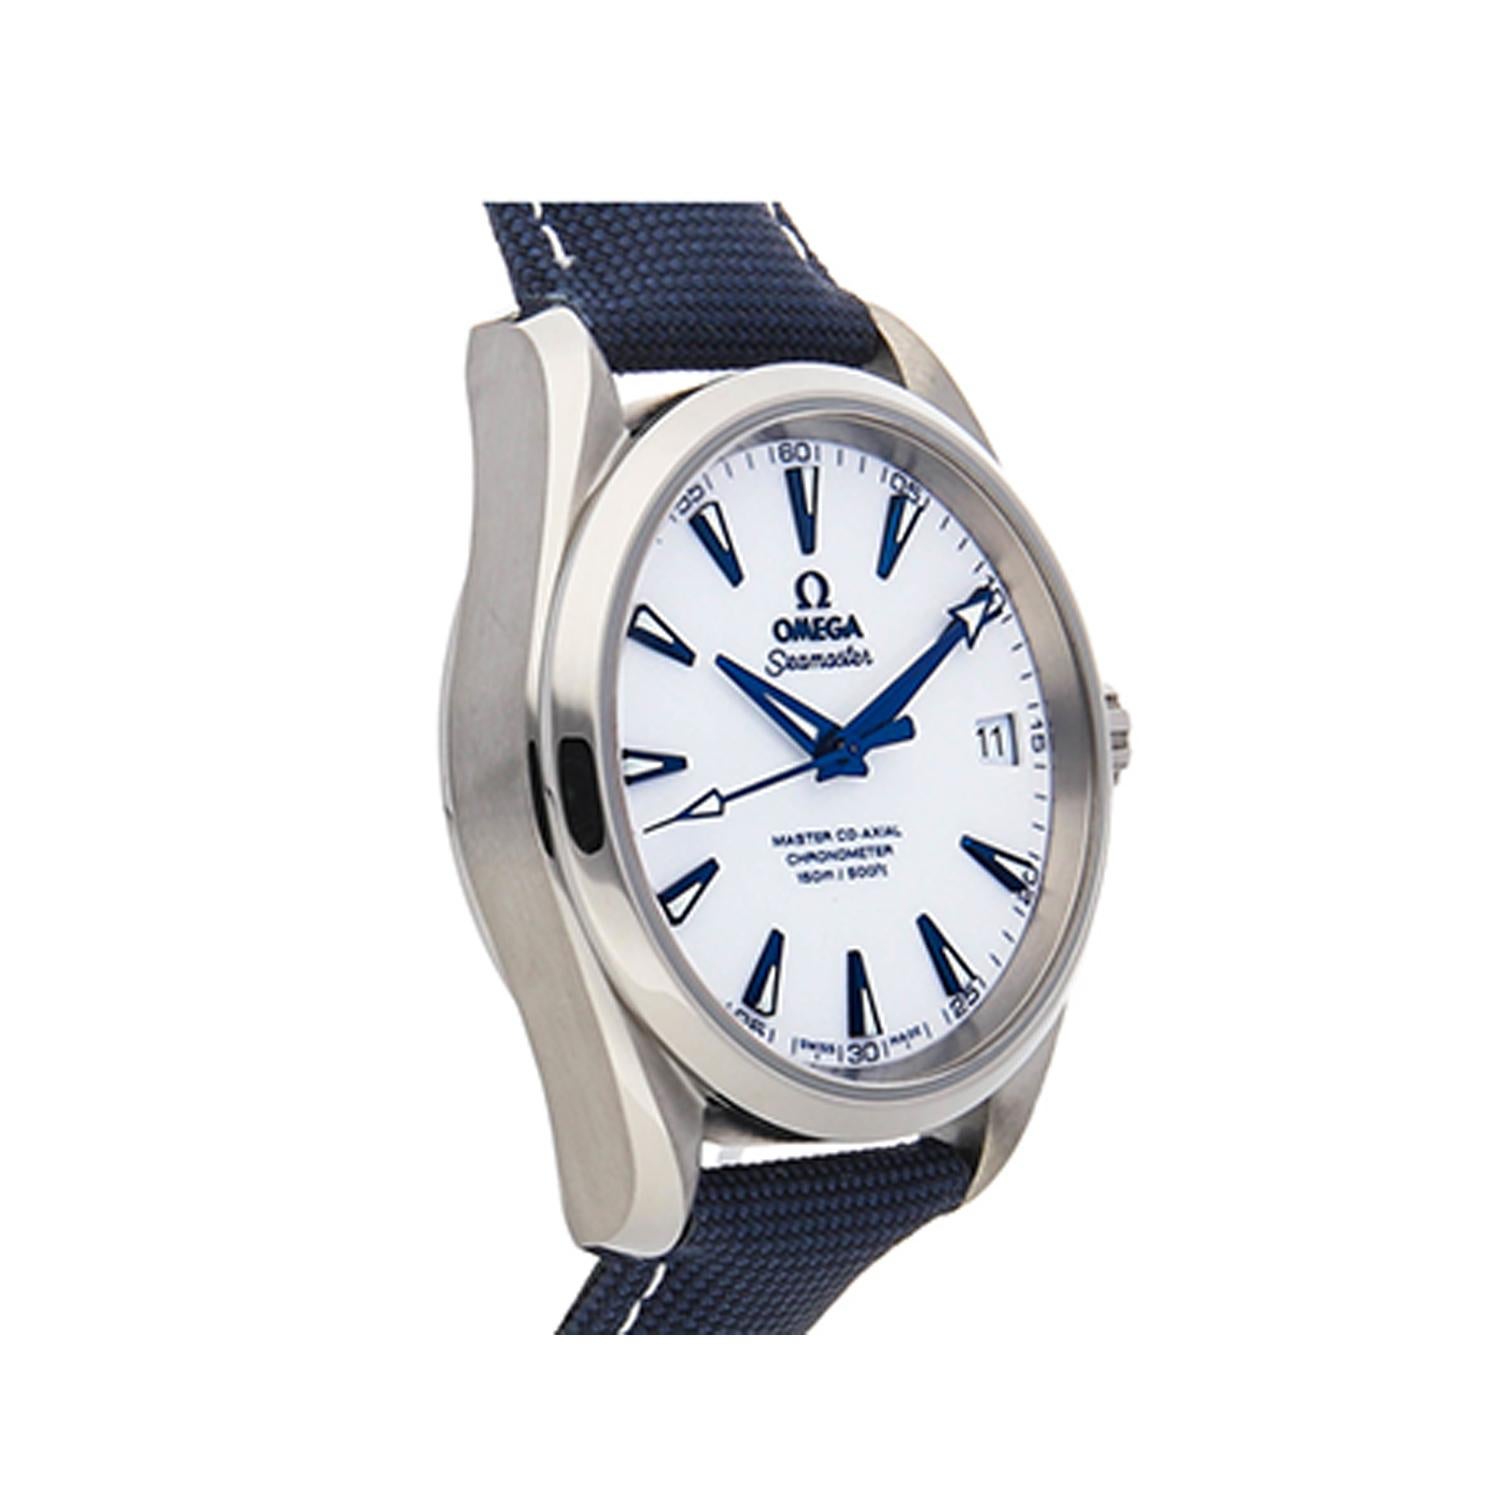 This brand new Omega Seamaster 231.92.39.21.04.001 is a beautiful men's timepiece that is powered by mechanical (automatic) movement which is cased in a titanium case. It has a round shape face, date indicator dial and has hand sticks style markers.